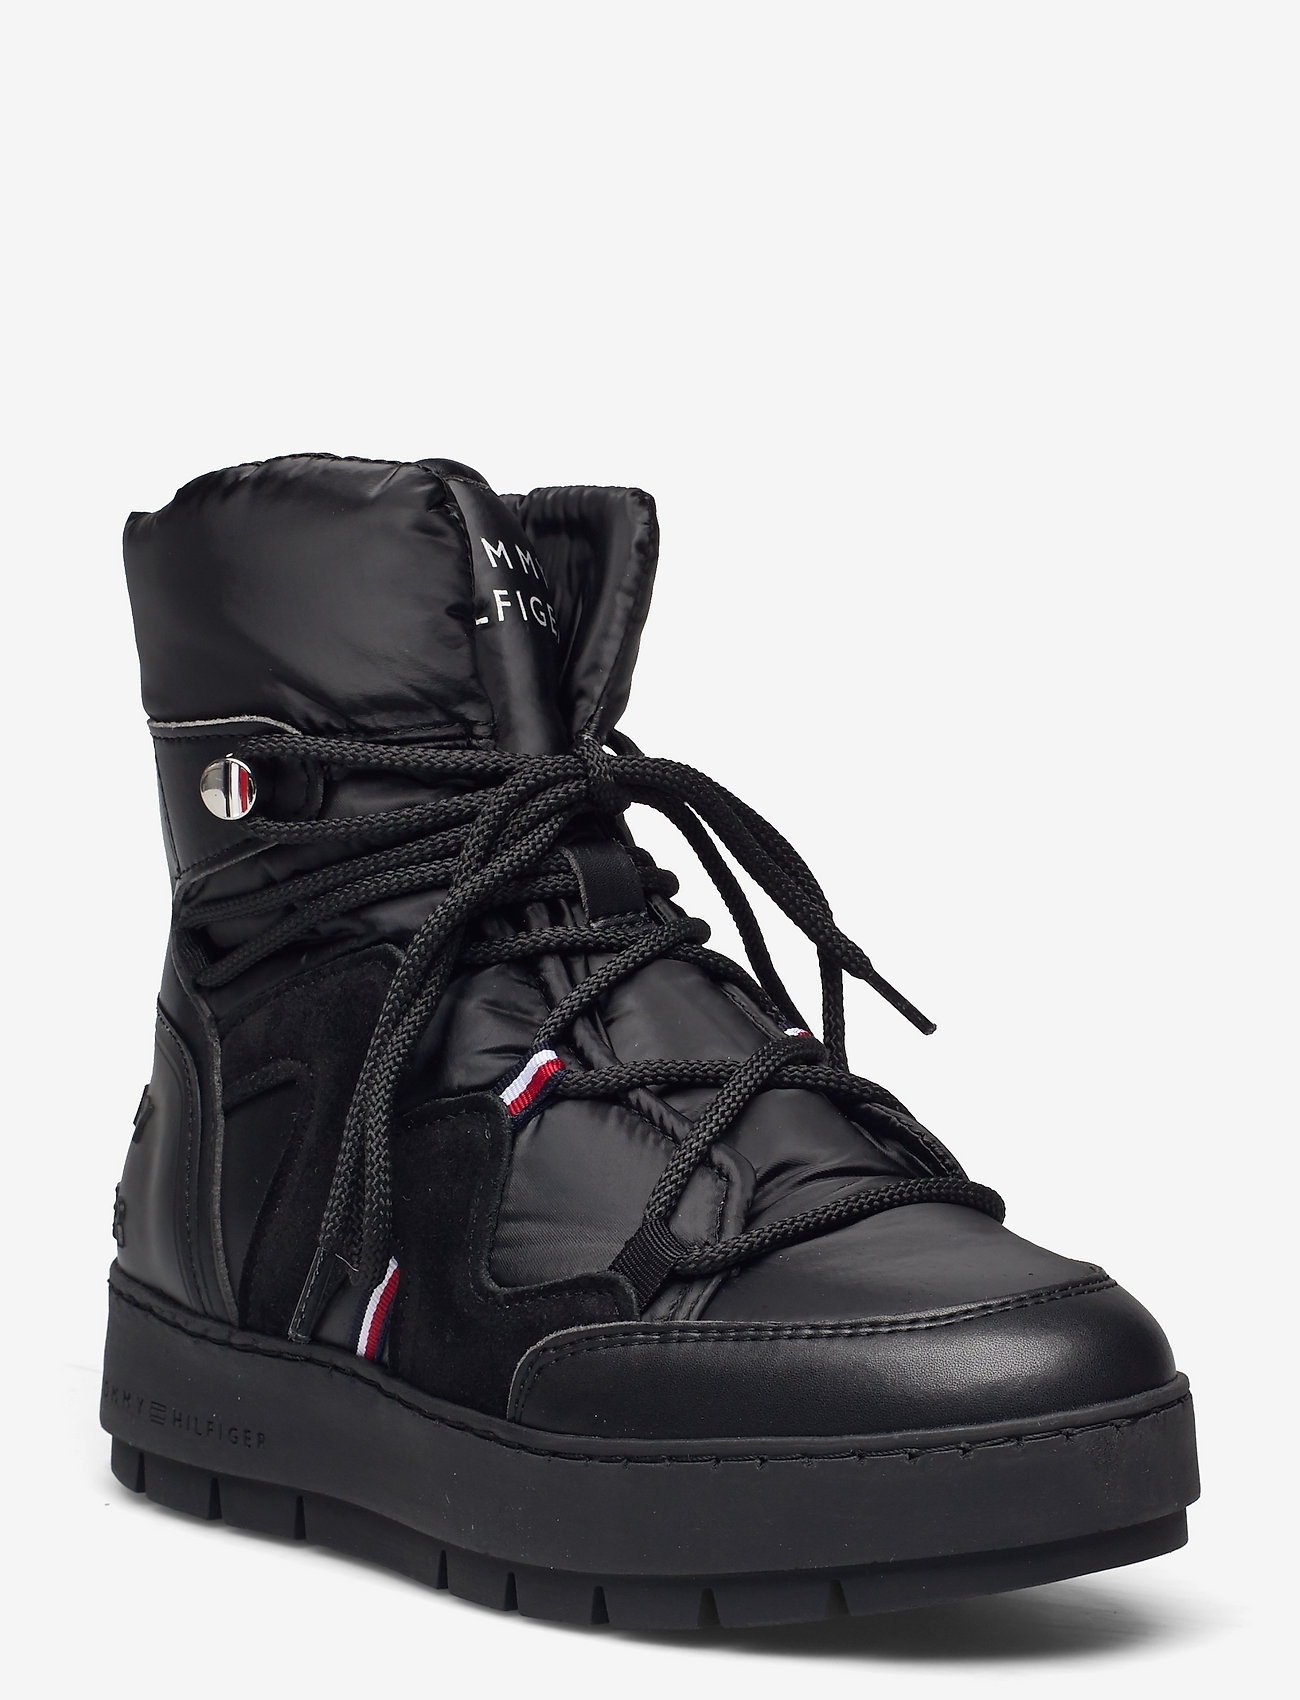 Tommy Hilfiger Tommy Hilfiger Snowboot - Flat ankle boots | Boozt.com